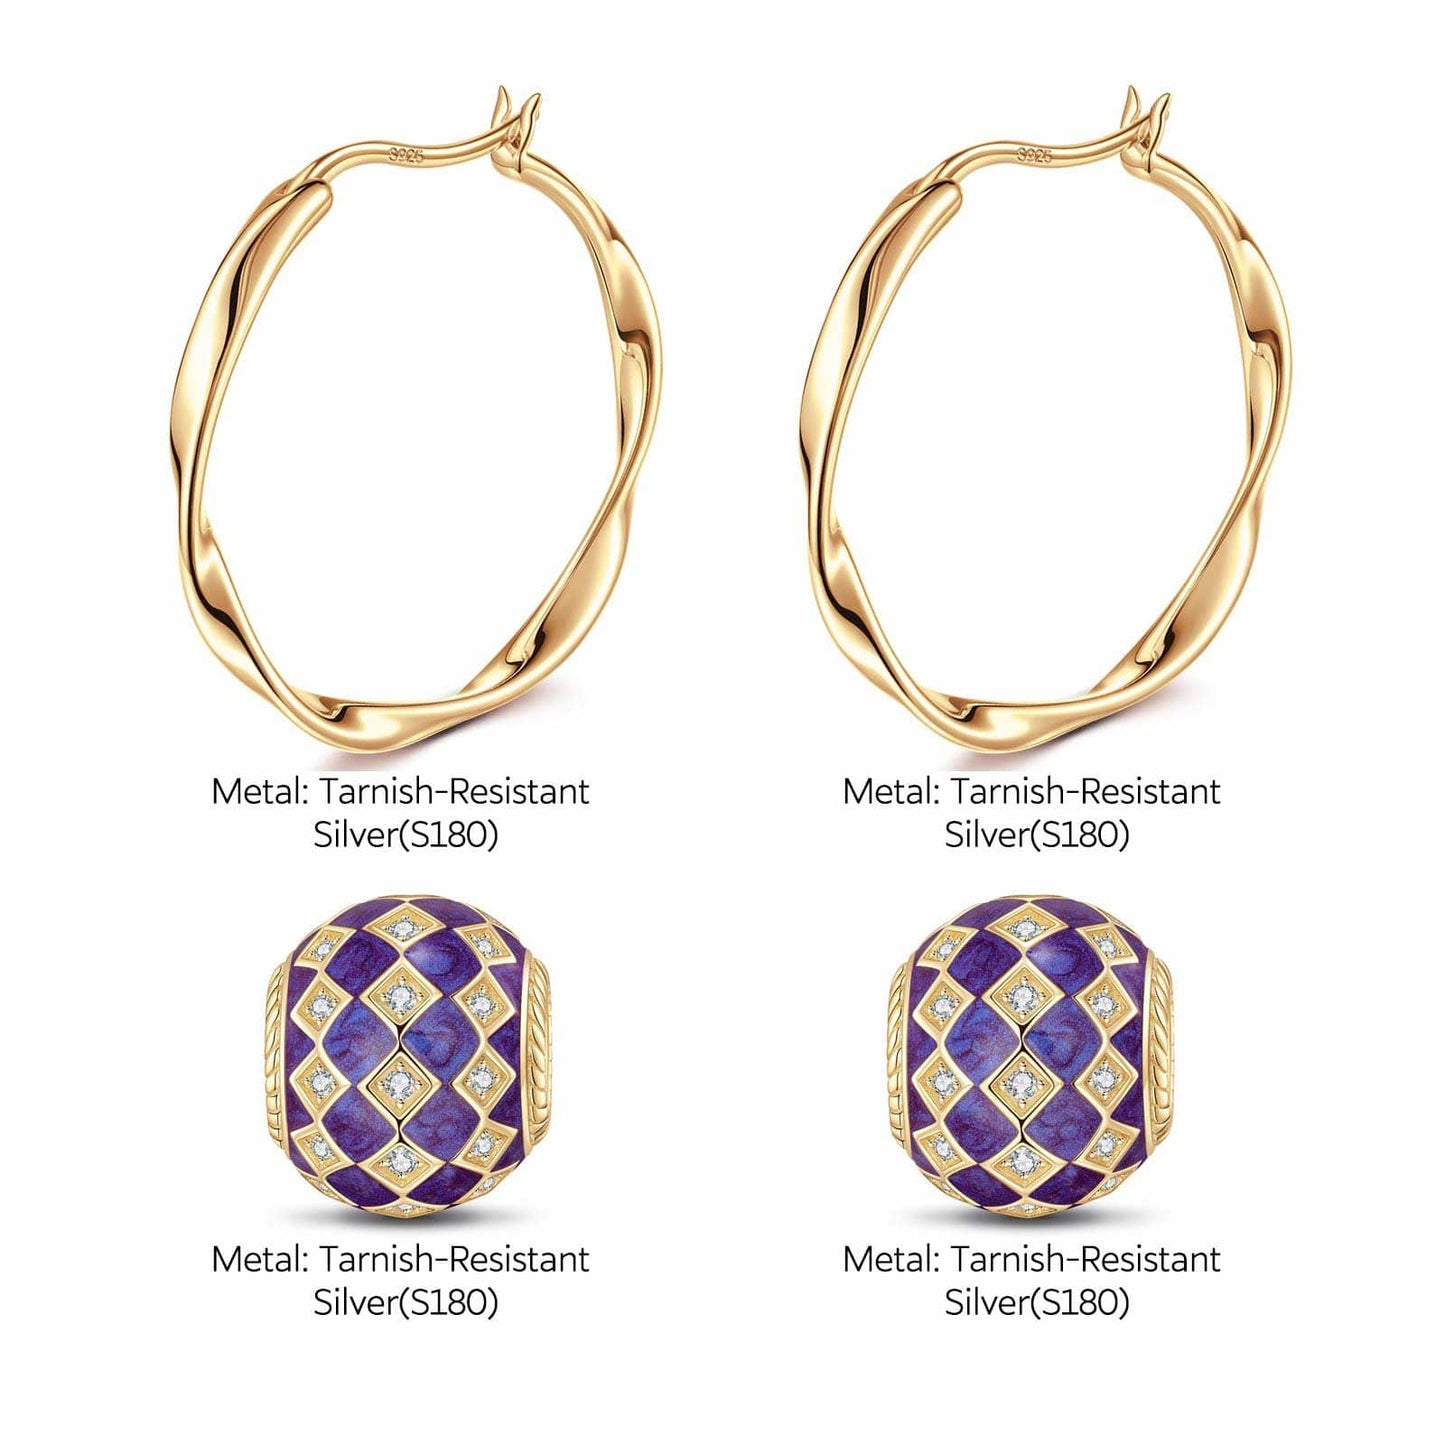 [💥As @mygreatchallenge's Pick] Purple Magic City Tarnish-resistant Silver Charms Earrings Set M Size Classic Hoop Earrings with Sterling Silver Ear Post With Enamel In 14K Gold Plated